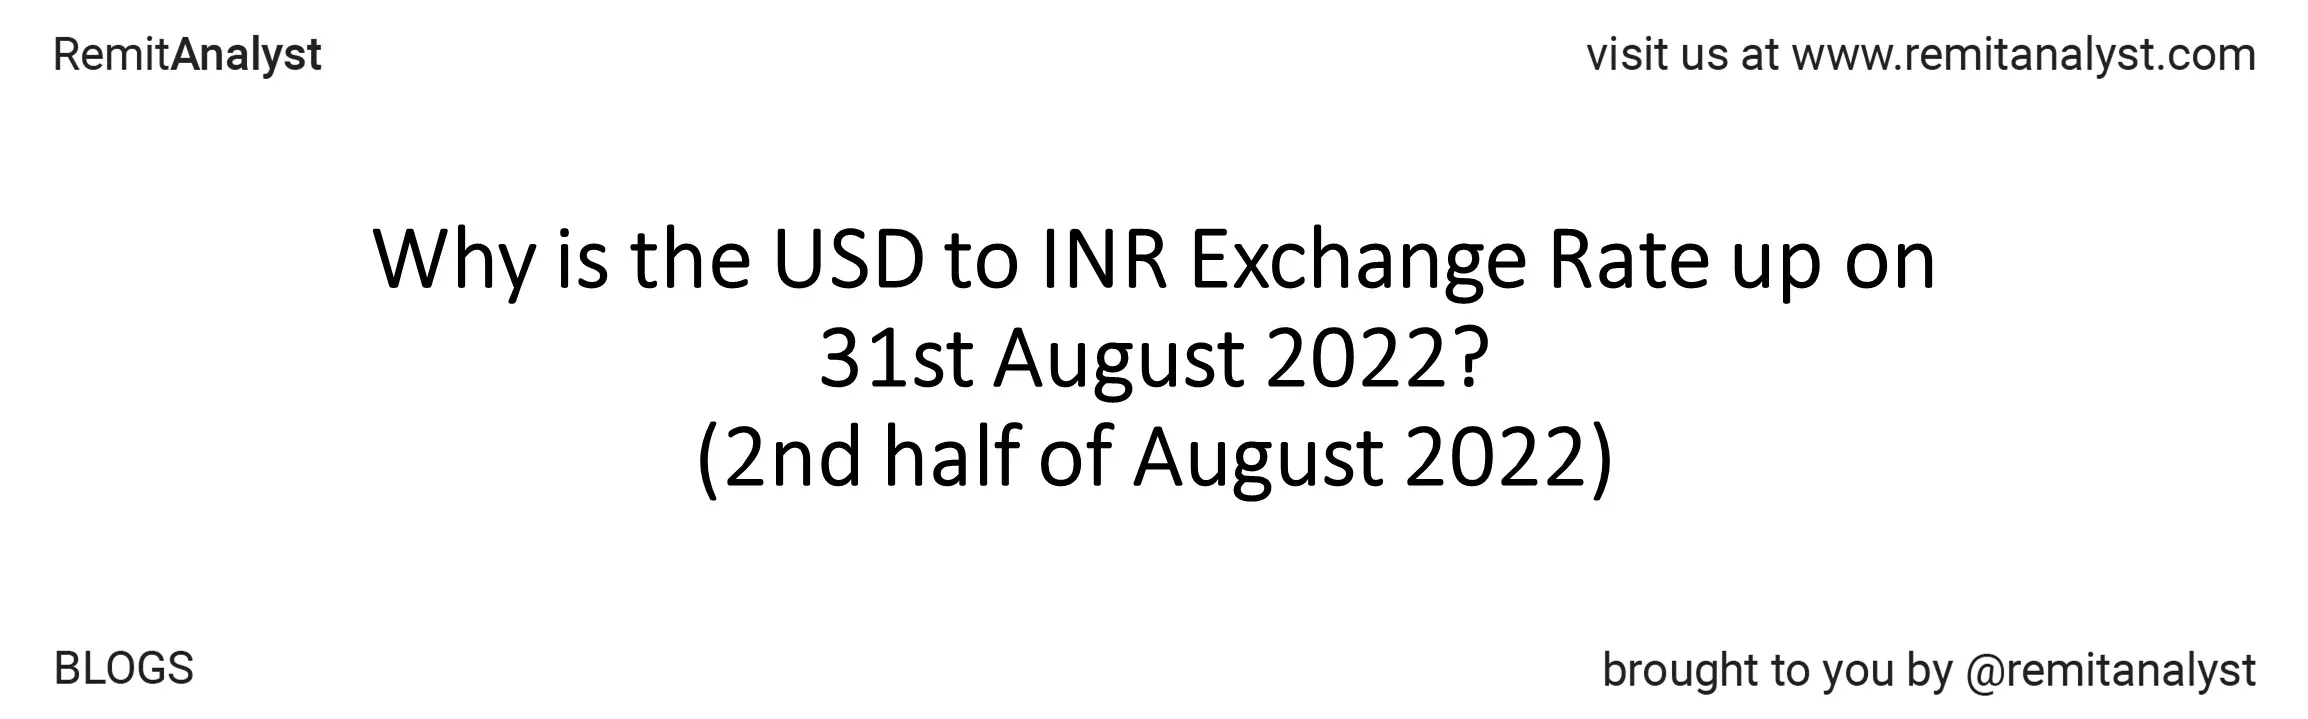 usd-to-inr-exchange-rate-16-Aug-2022-to-31-Aug-2022-title